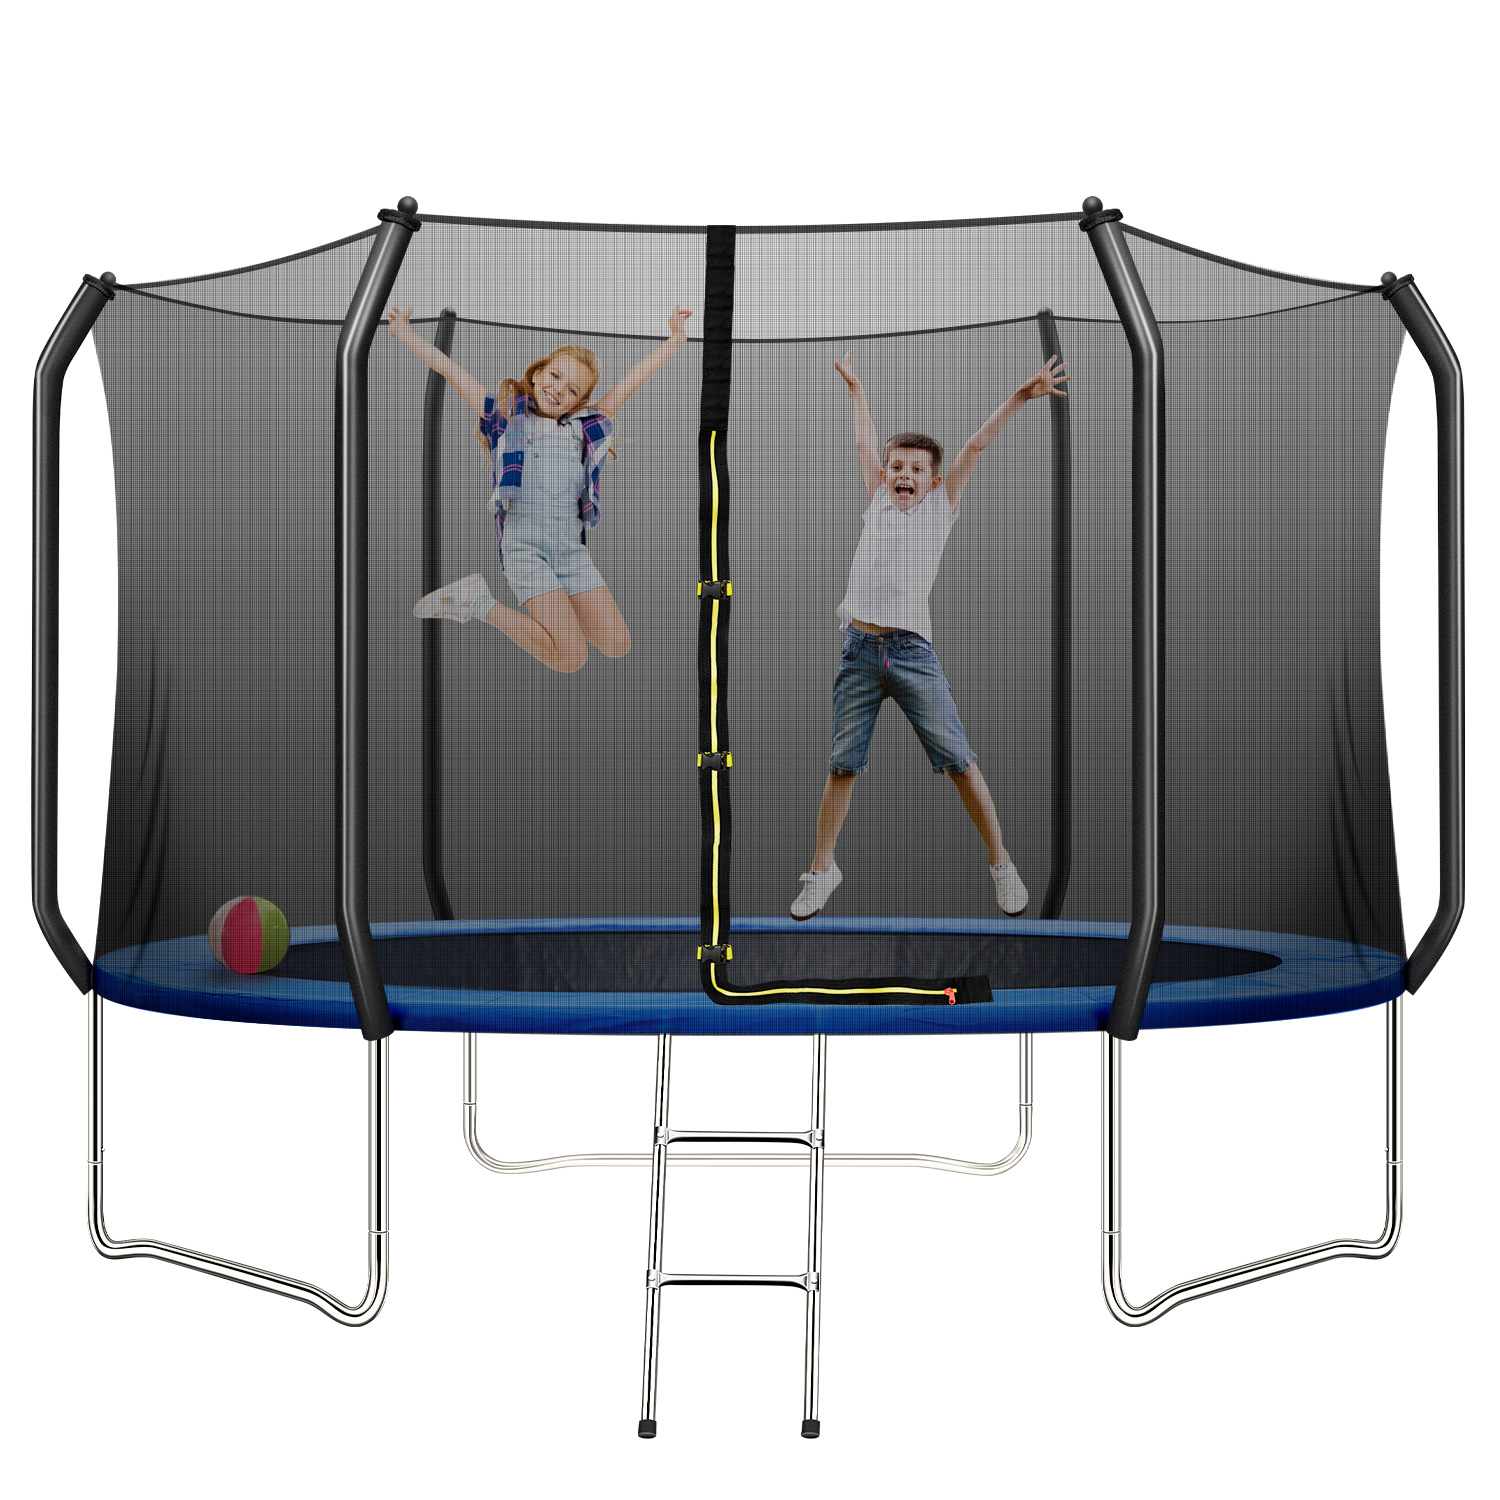 TRIPLE TREE 10 FT Trampoline with Safe Enclosure Net, 660 lbs Capacity for 3 Kids, Outdoor Fitness Trampoline with Waterproof Jump Mat Ladder for Indoor Park Kindergarten Toddler Trampolines - image 1 of 8